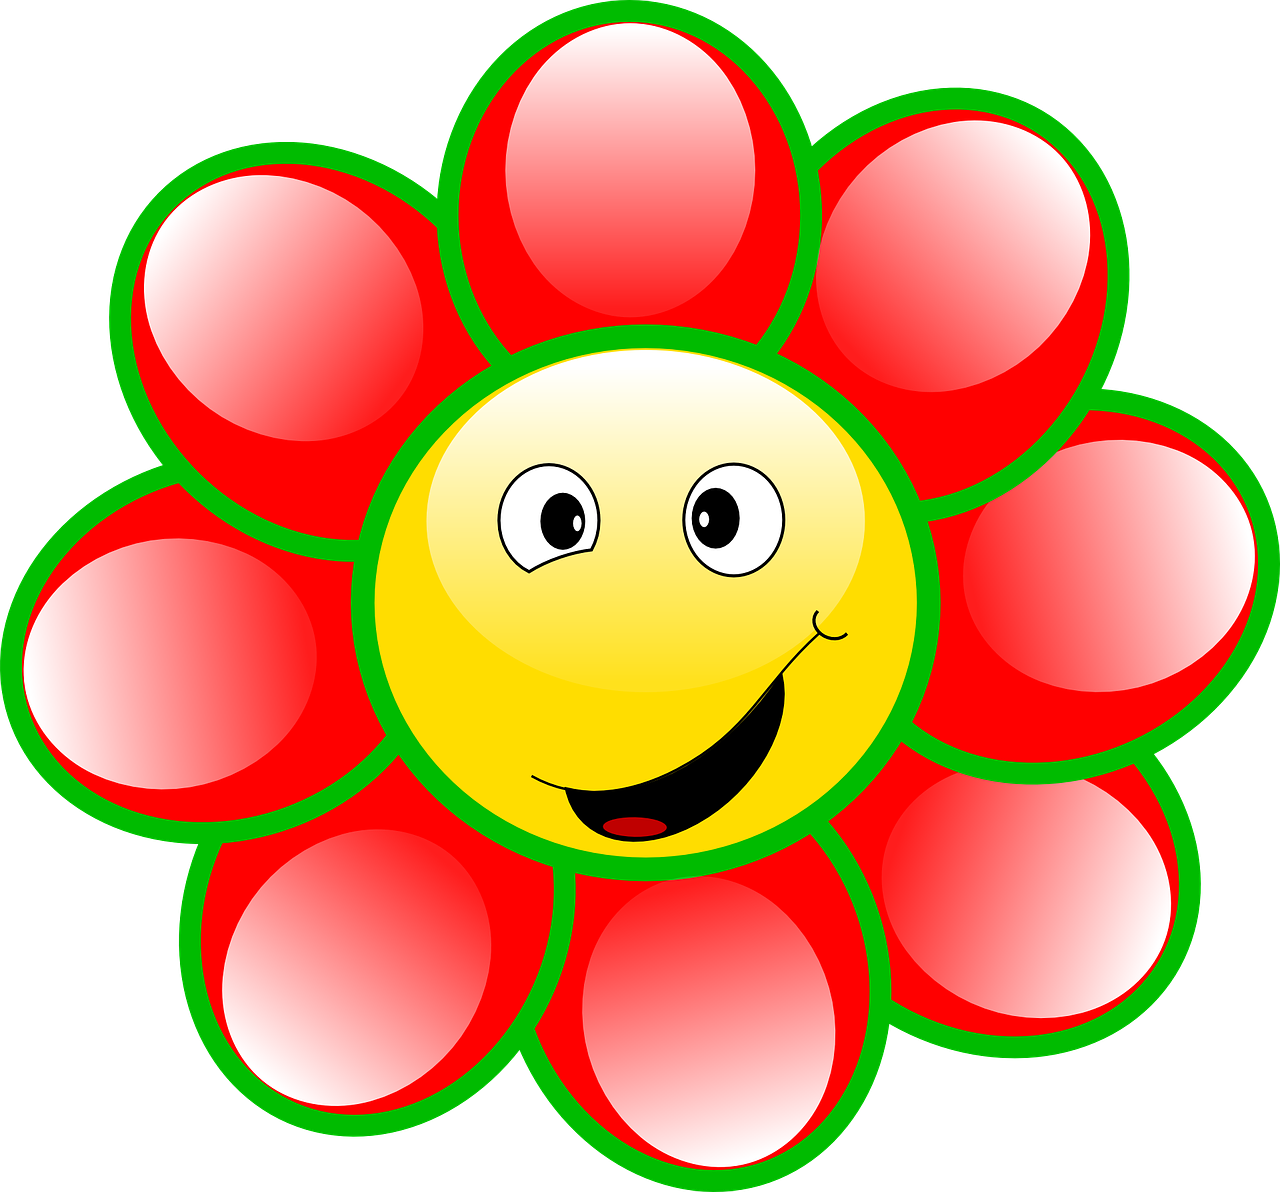 Download free photo of Smiley,flower,face,goofy,smile - from 